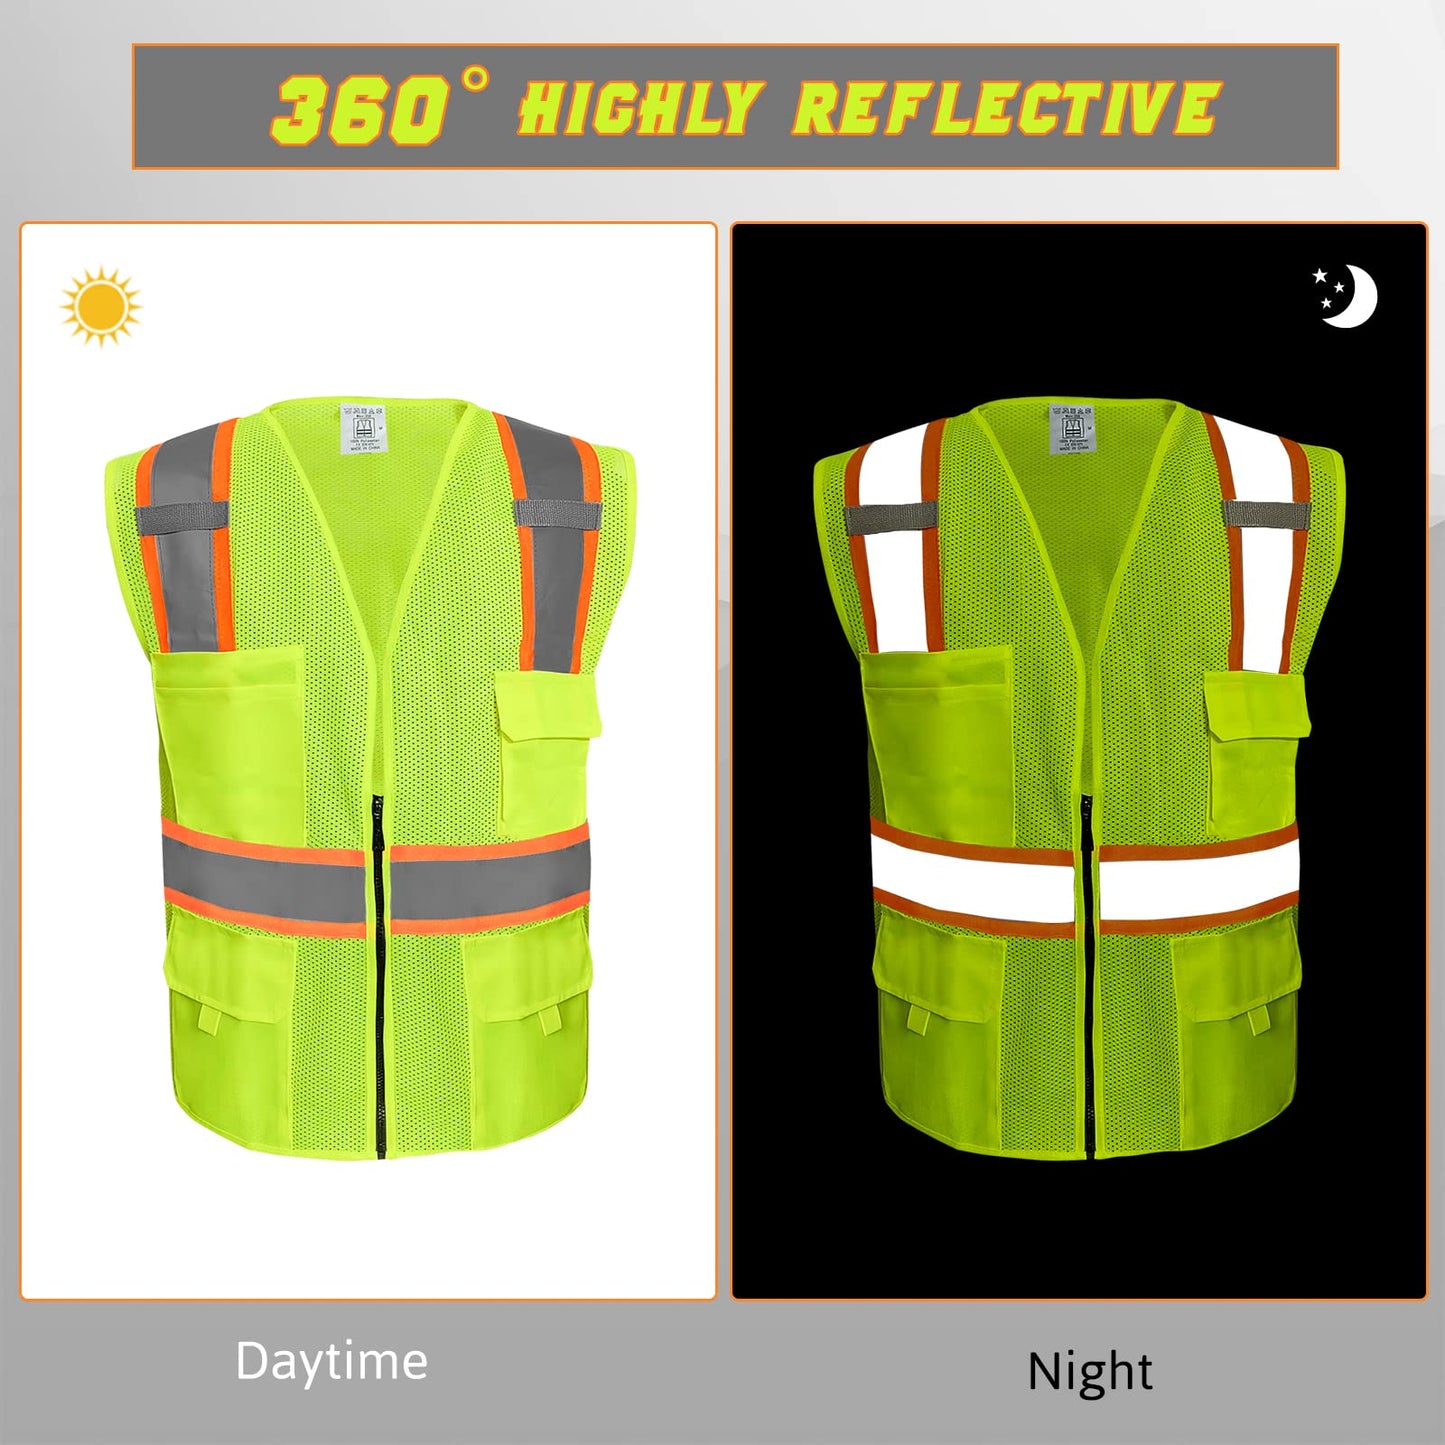 360° HIGHLY REFLECTIVE